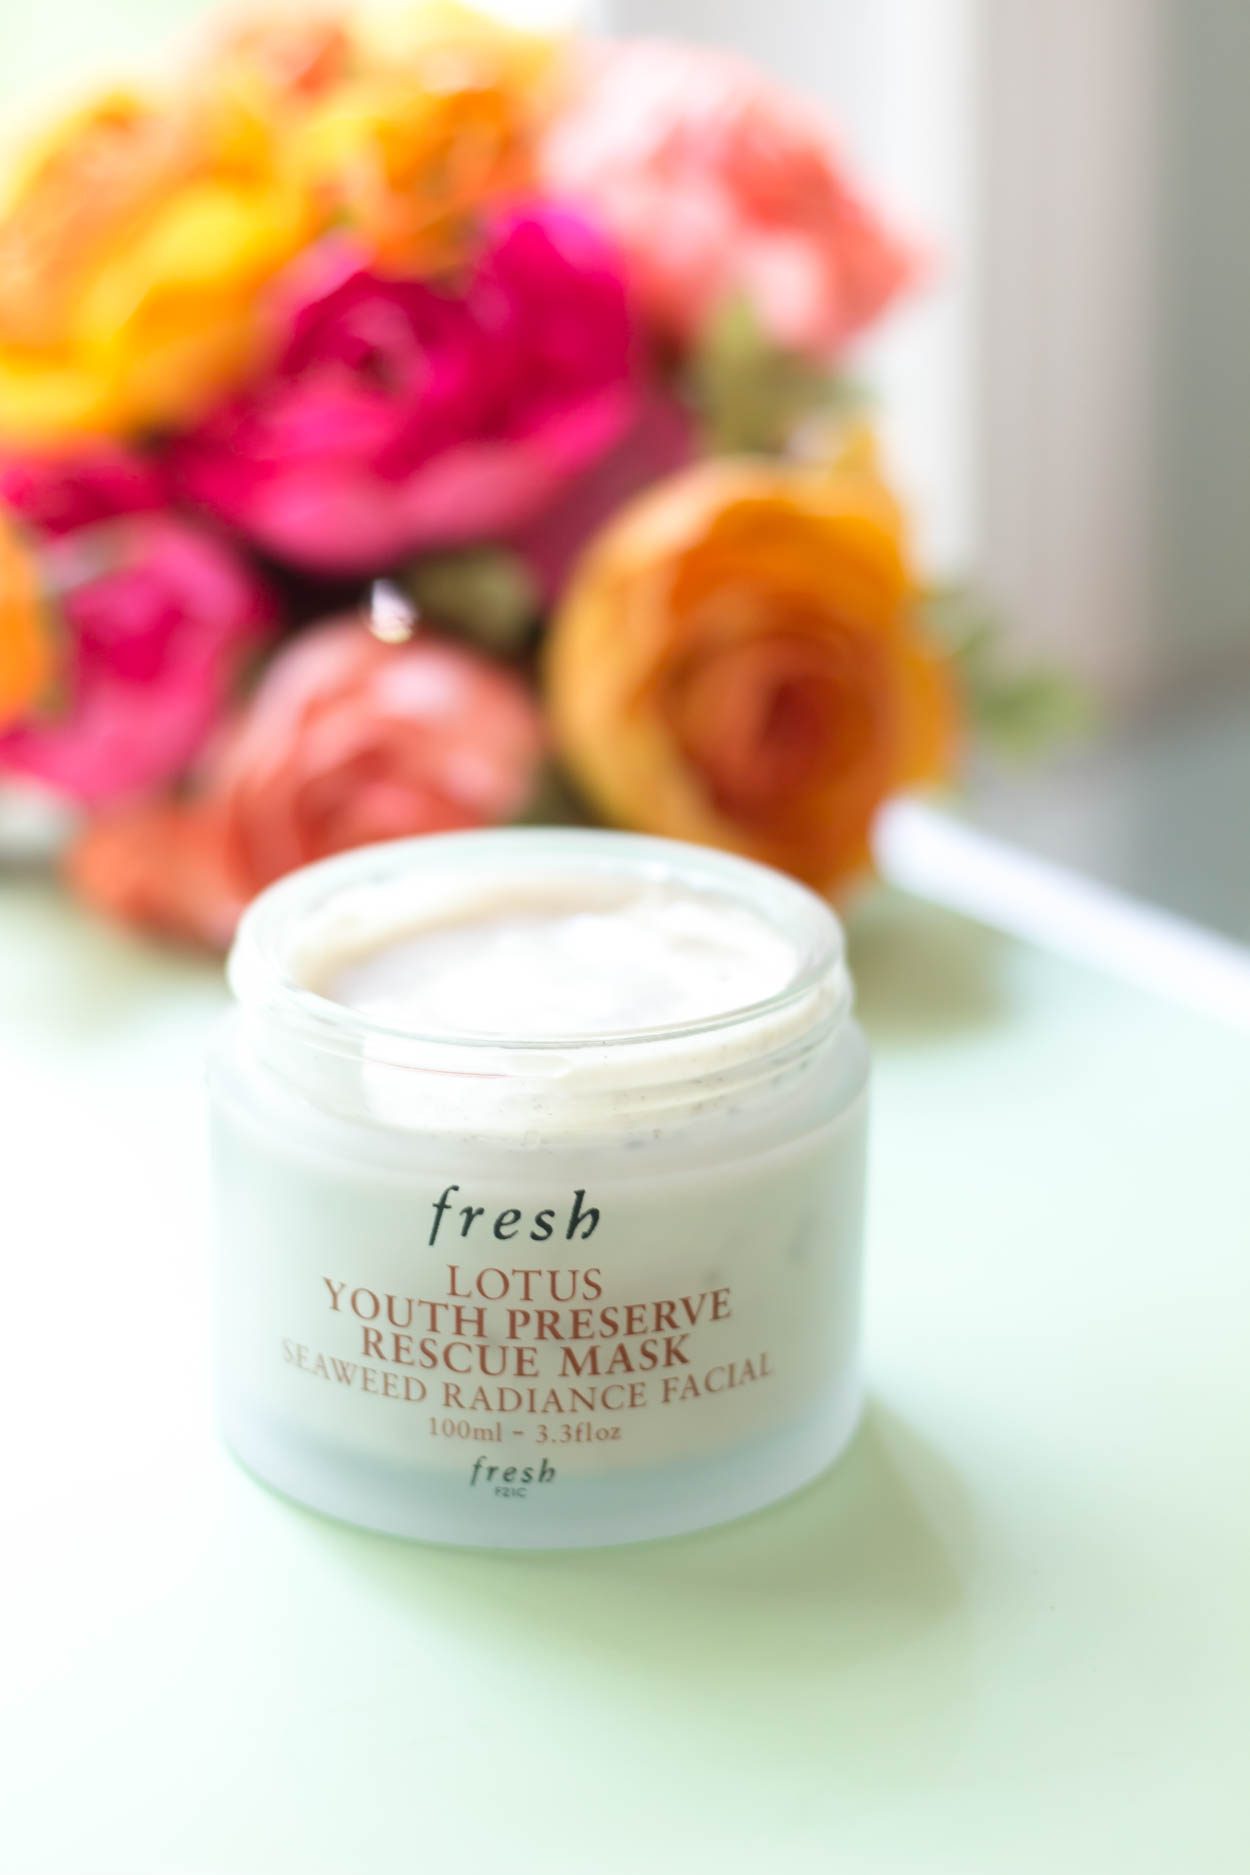 Fresh Skincare has to be one of my favorite skincare brands. Natural ingredients, but with modern technology! Their Rose Face Mask is outta this world good! #beauty #skincare